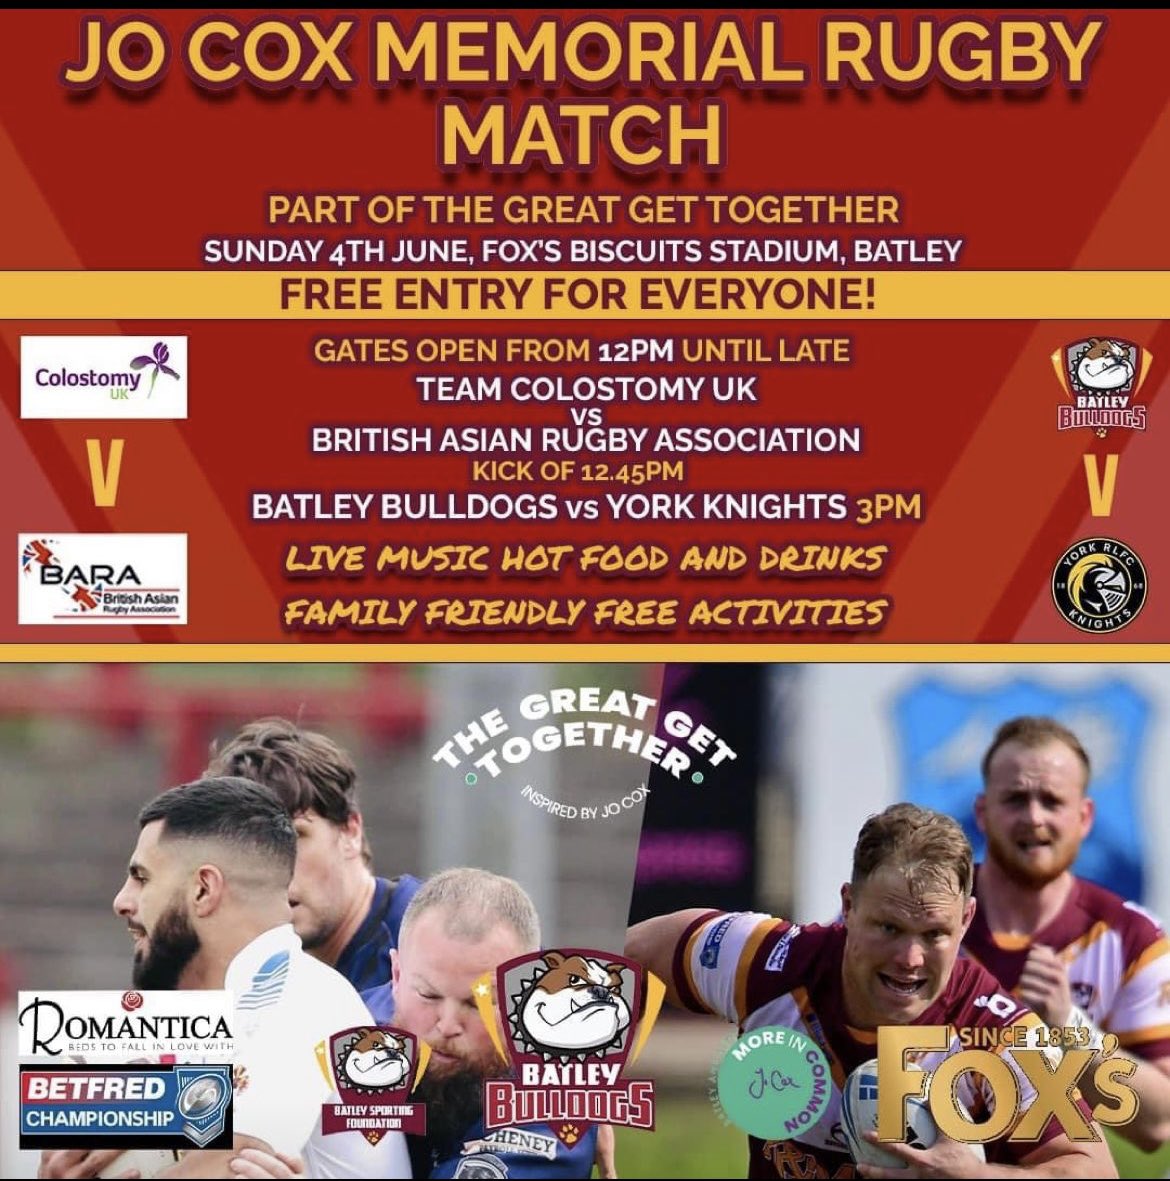 📣 We’re thrilled and honoured that we’ll be taking part in the #JoCox Memorial #RugbyLeague games on June 4, when we renew acquaintances with BARA before @BatleyRLFC face @YorkRLFC 😊 
The day is FREE to attend and there’s LOADS going on. Check out the graphic for full details!